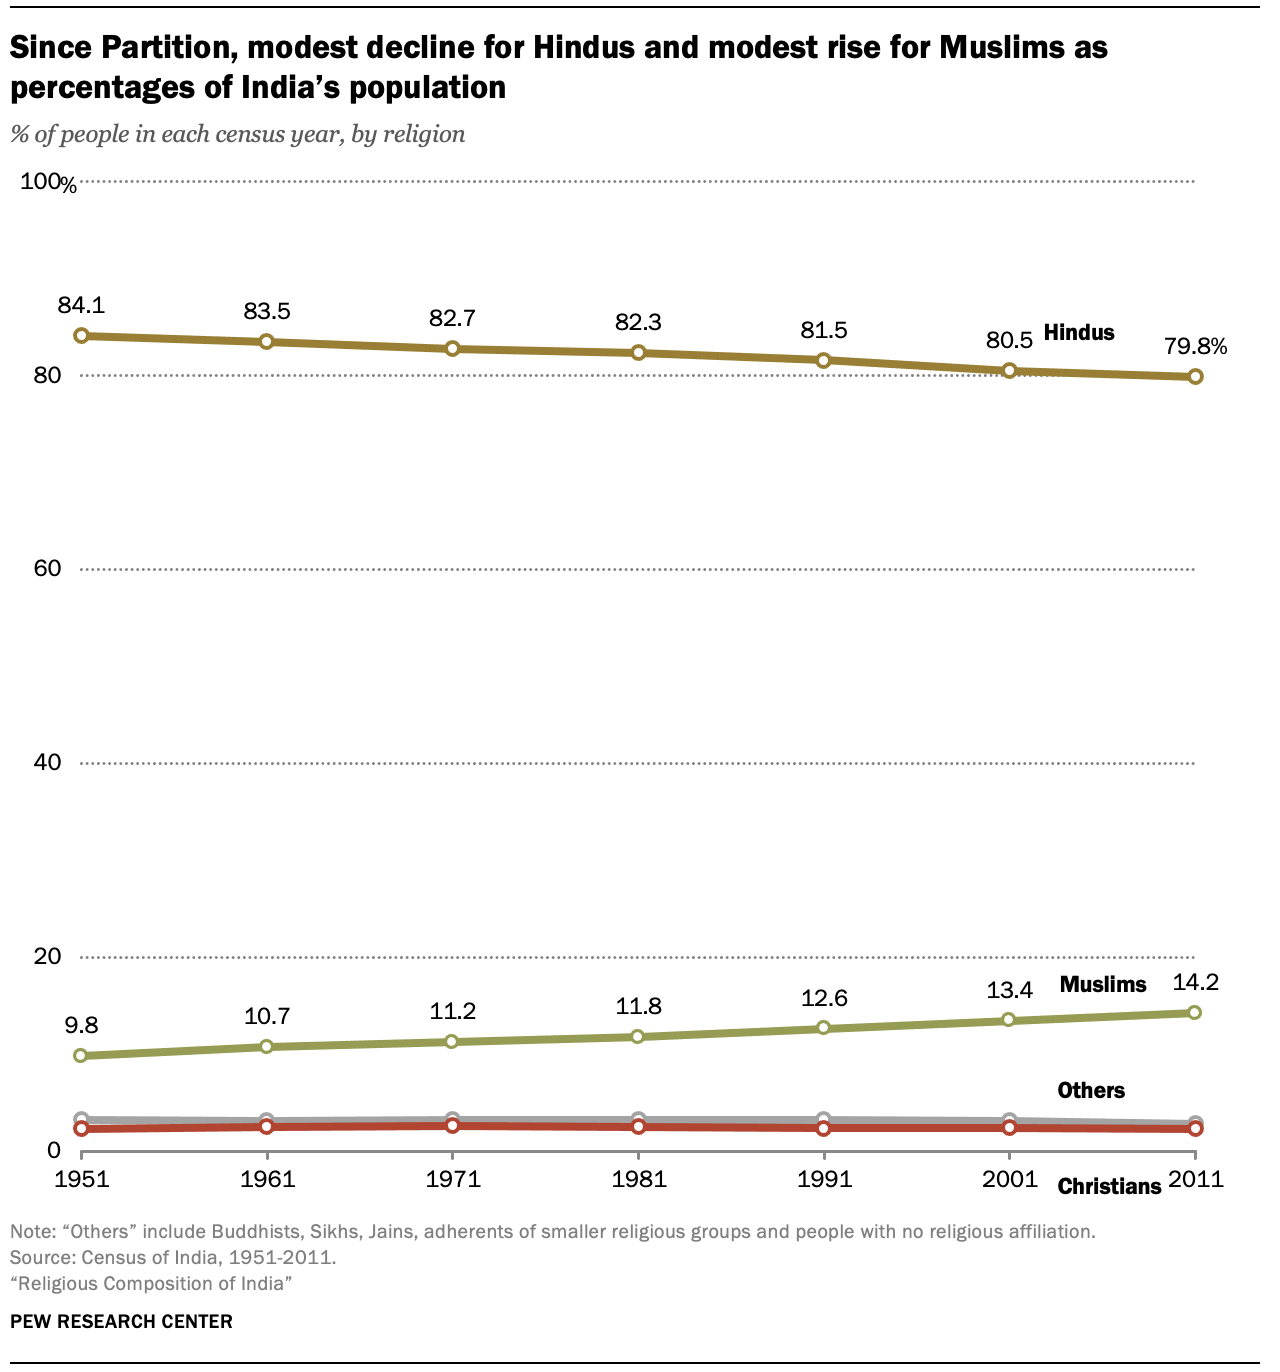 Since Partition, modest decline for Hindus and modest rise for Muslims as percentages of India’s population